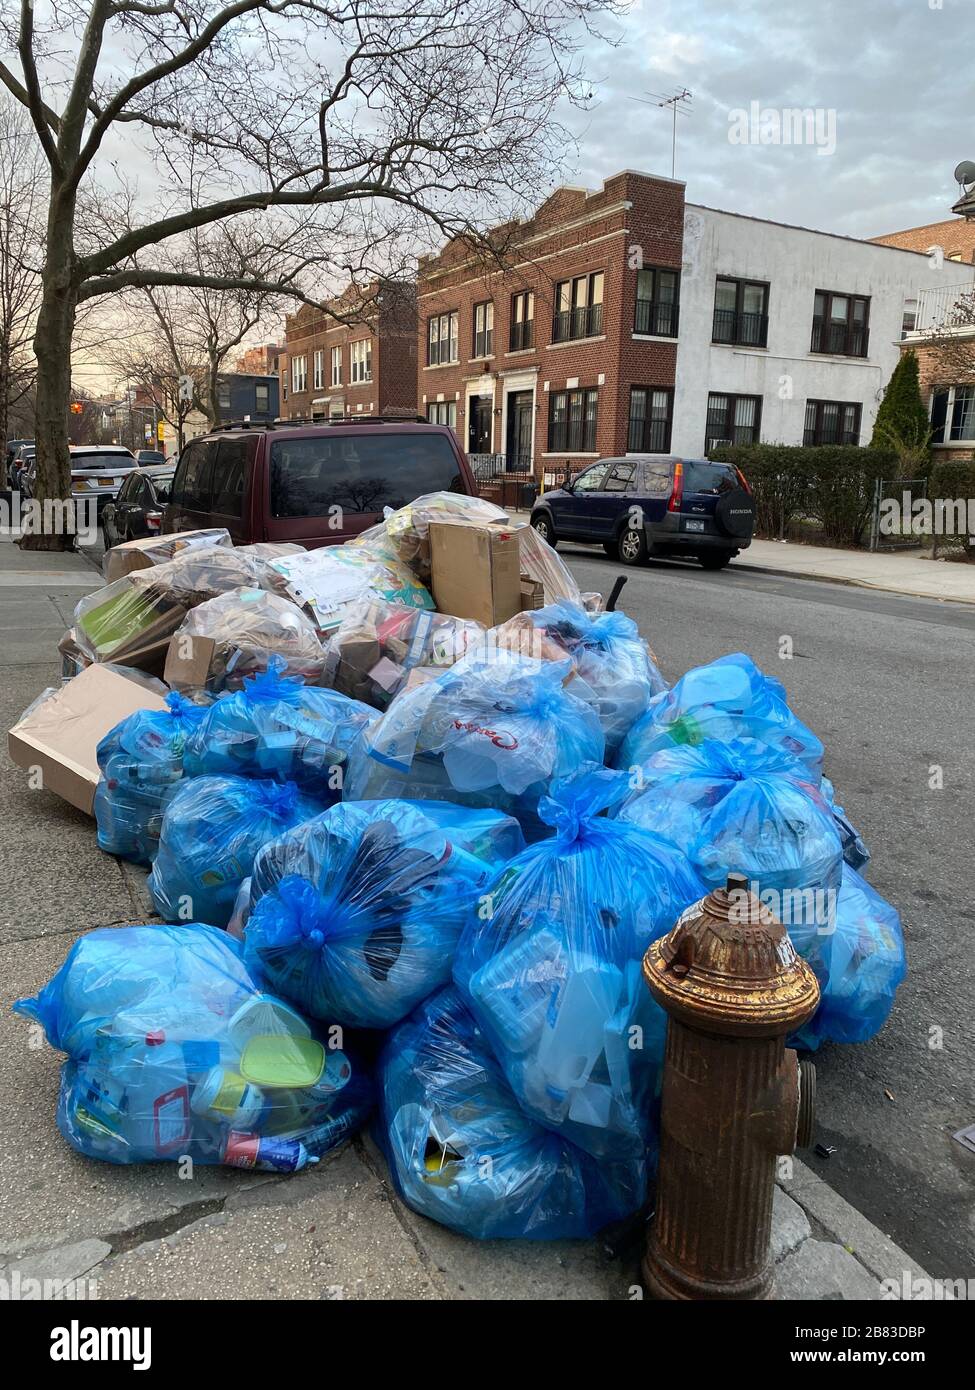 https://c8.alamy.com/comp/2B83DBP/recyclables-in-clear-or-blue-garbage-bags-ready-for-weekly-pickup-in-a-brooklyn-neighborhood-are-a-constant-reminder-of-the-amount-of-garbage-we-americans-generate-every-day-2B83DBP.jpg